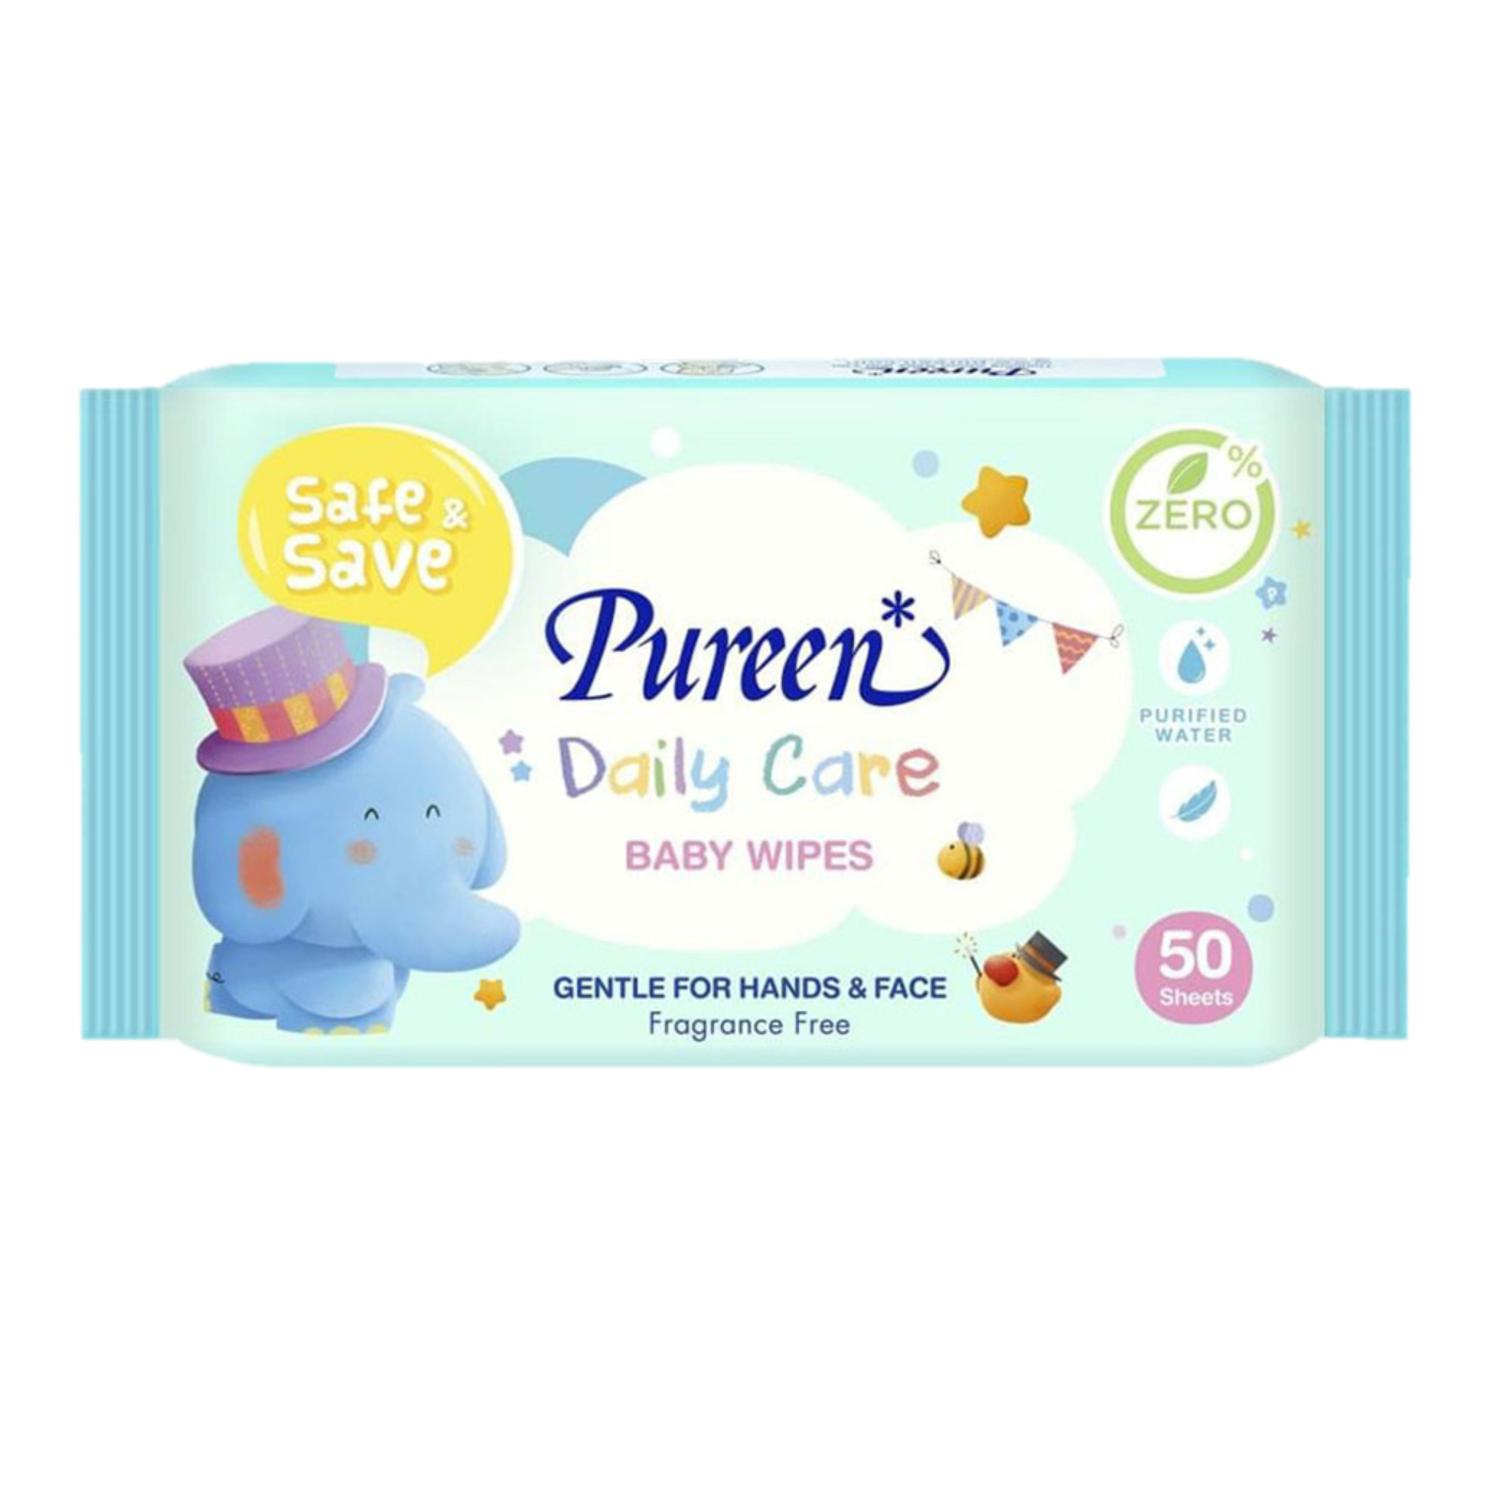 Pureen Daily Care Wipes 50pcs